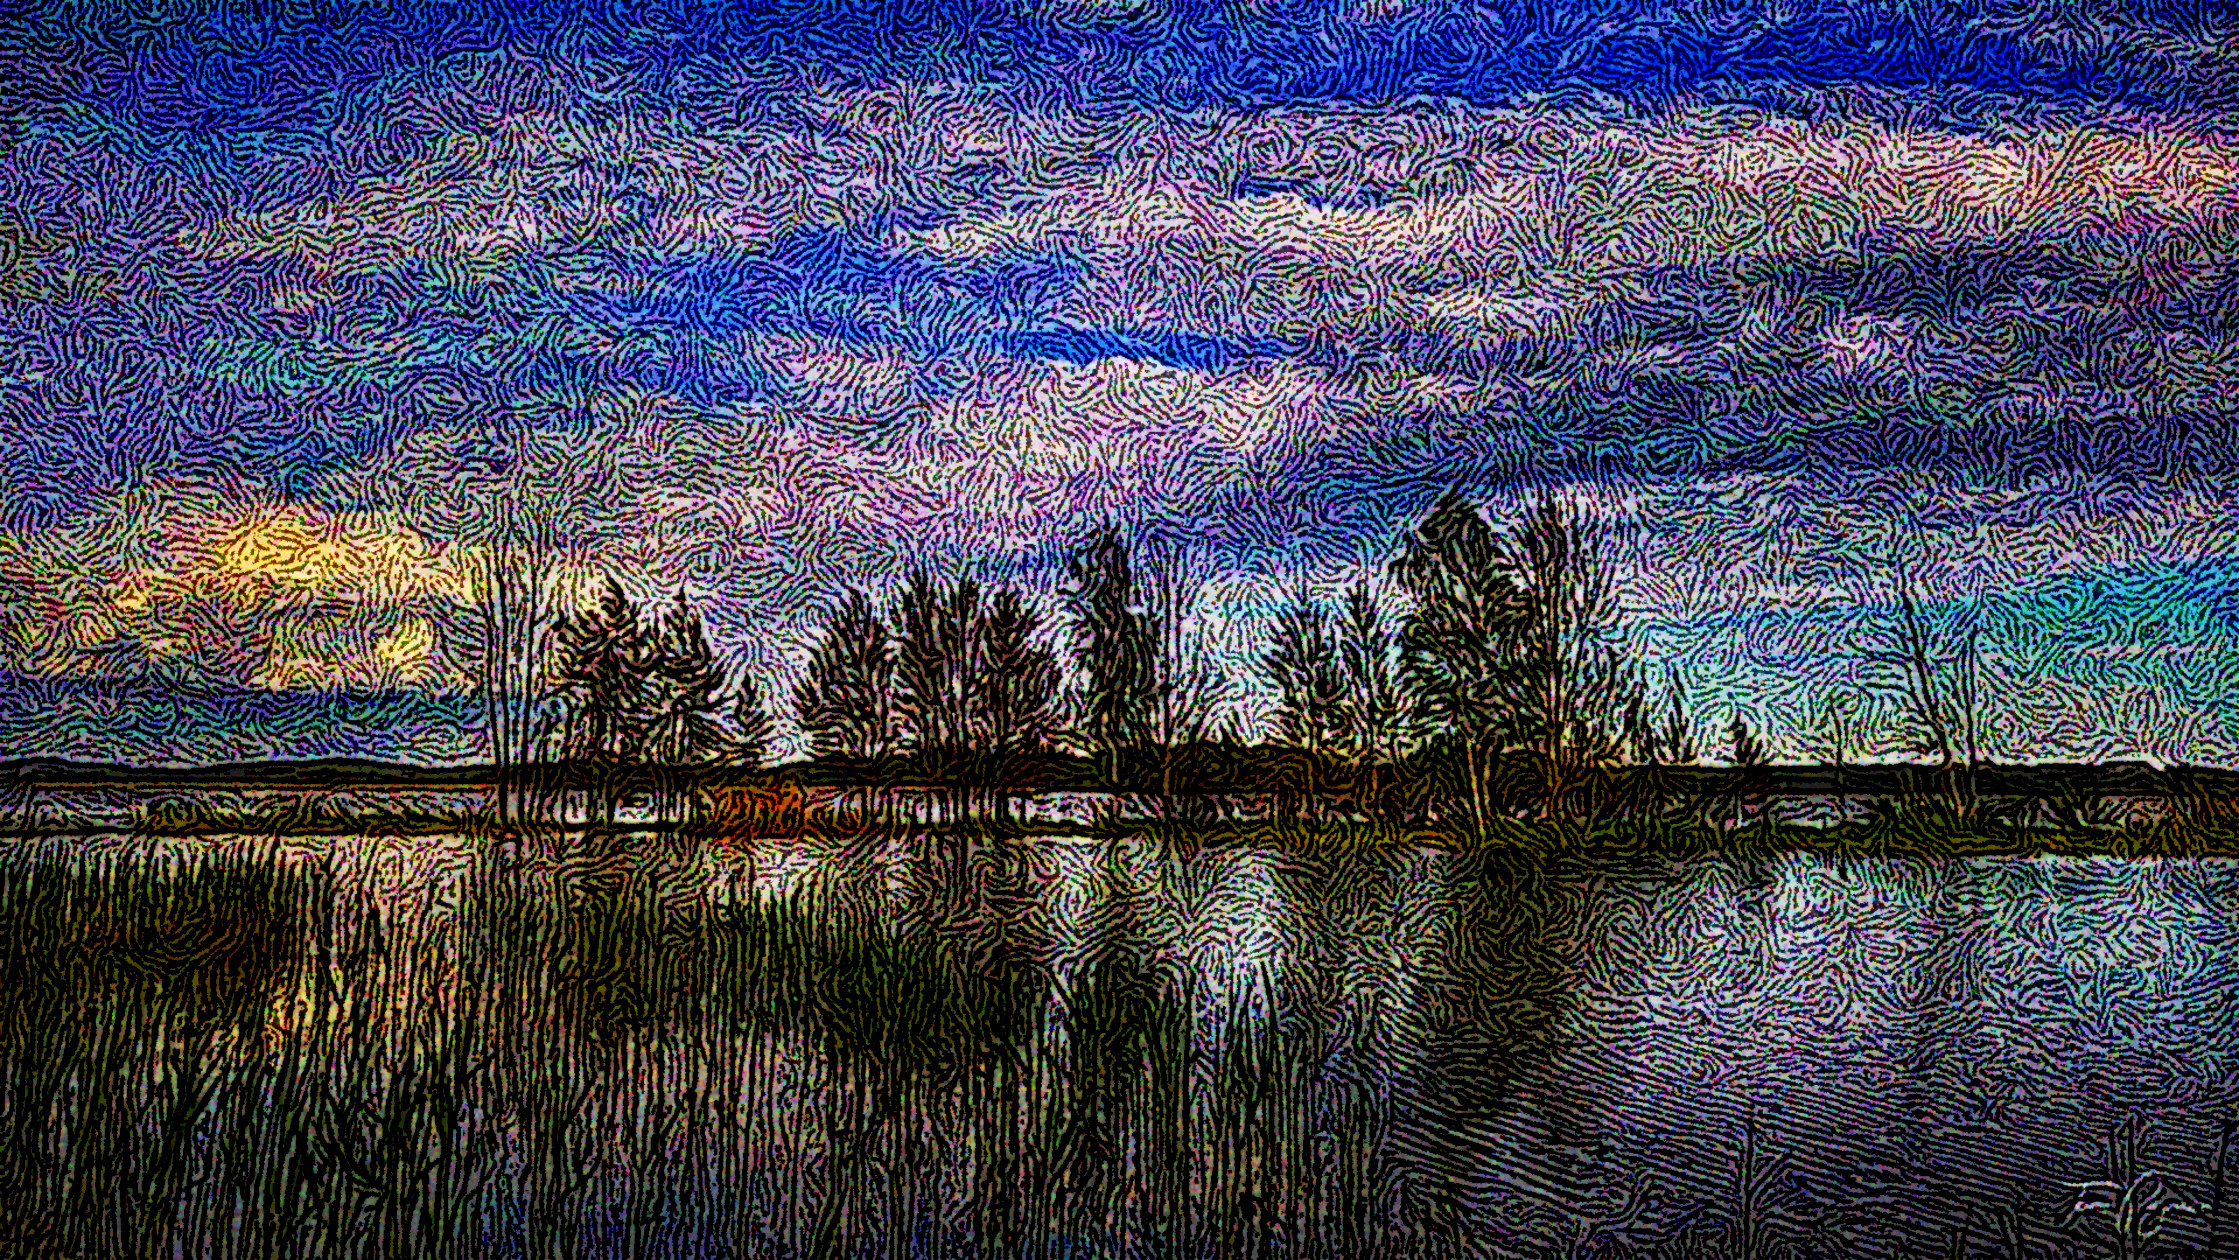 trees_by_the_lagoon_by_pajunen_ddy6duc-DN_DrawEffect_S_Twirled_nb.jpg